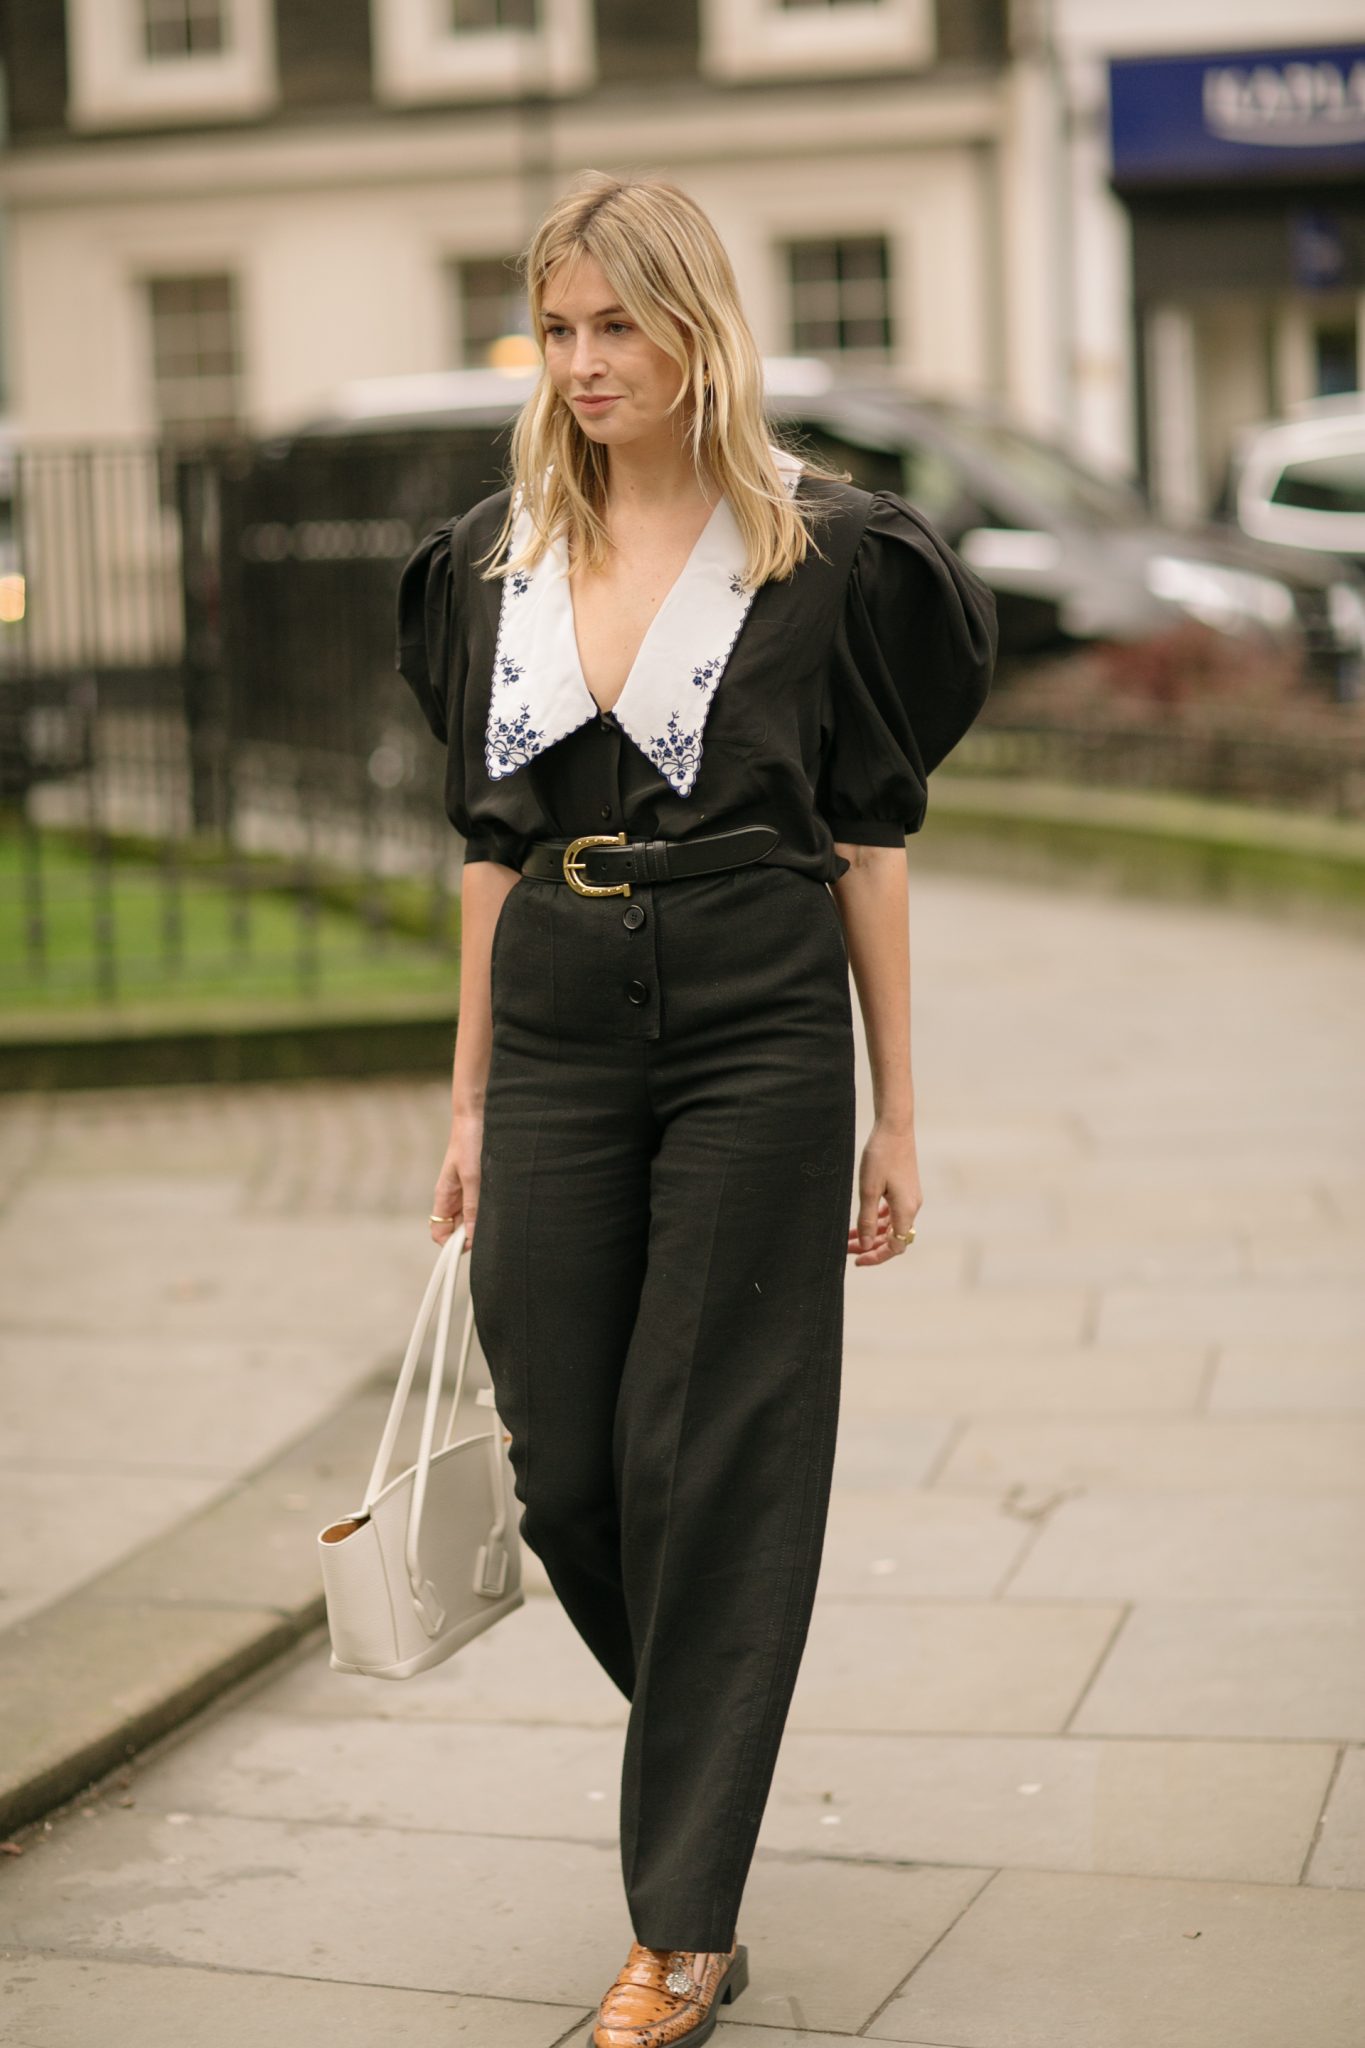 How to wear black for spring